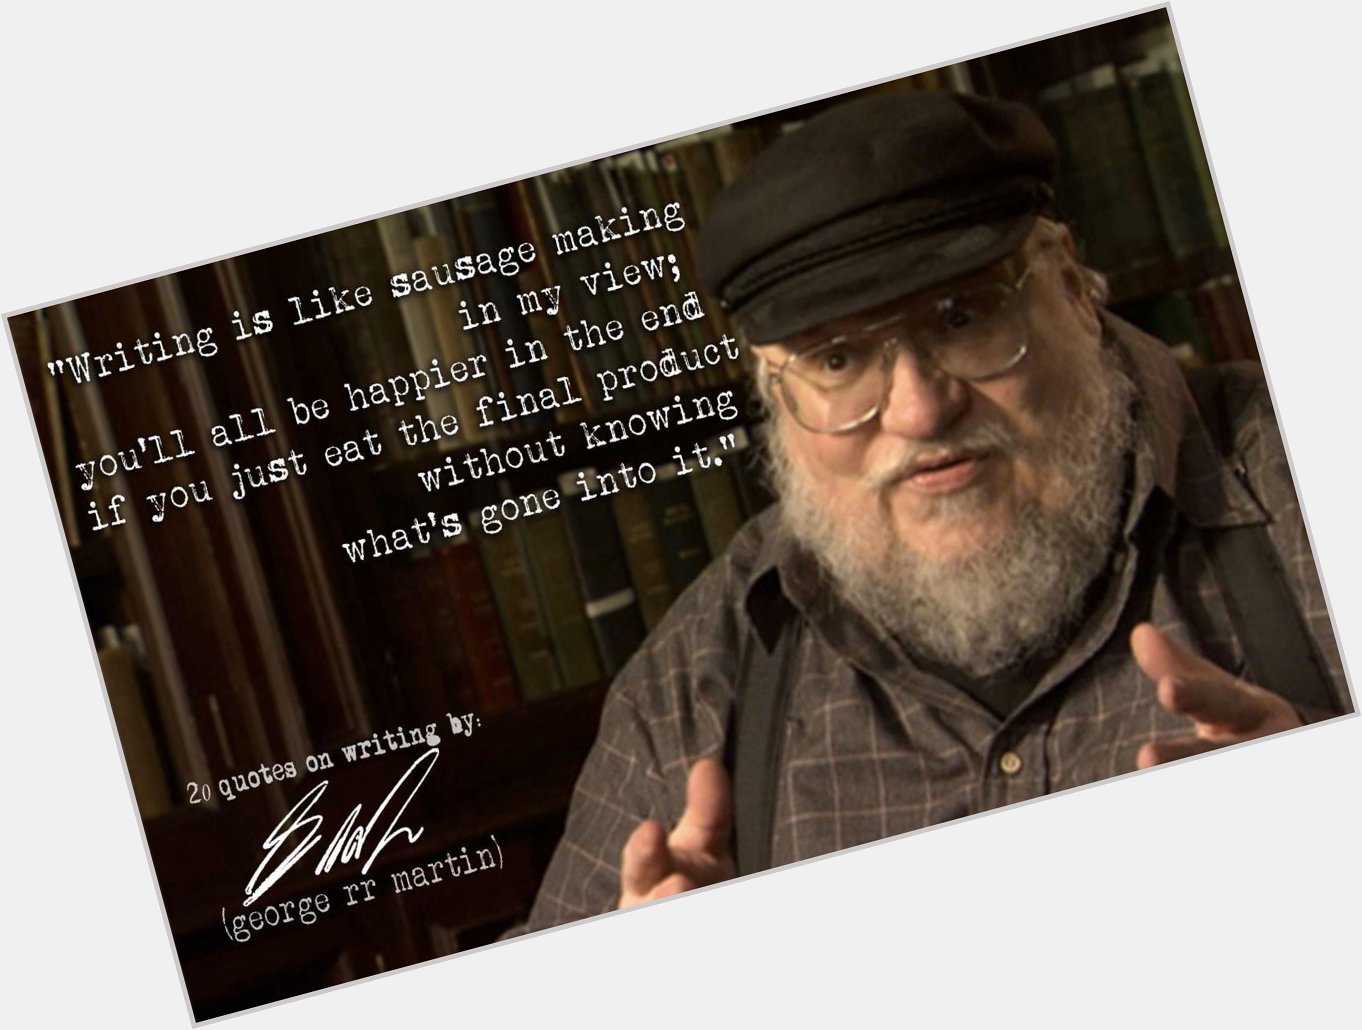 Happy birthday George RR Martin! The Game of Thrones/Song of Ice and Fire author turns 67 today :) 